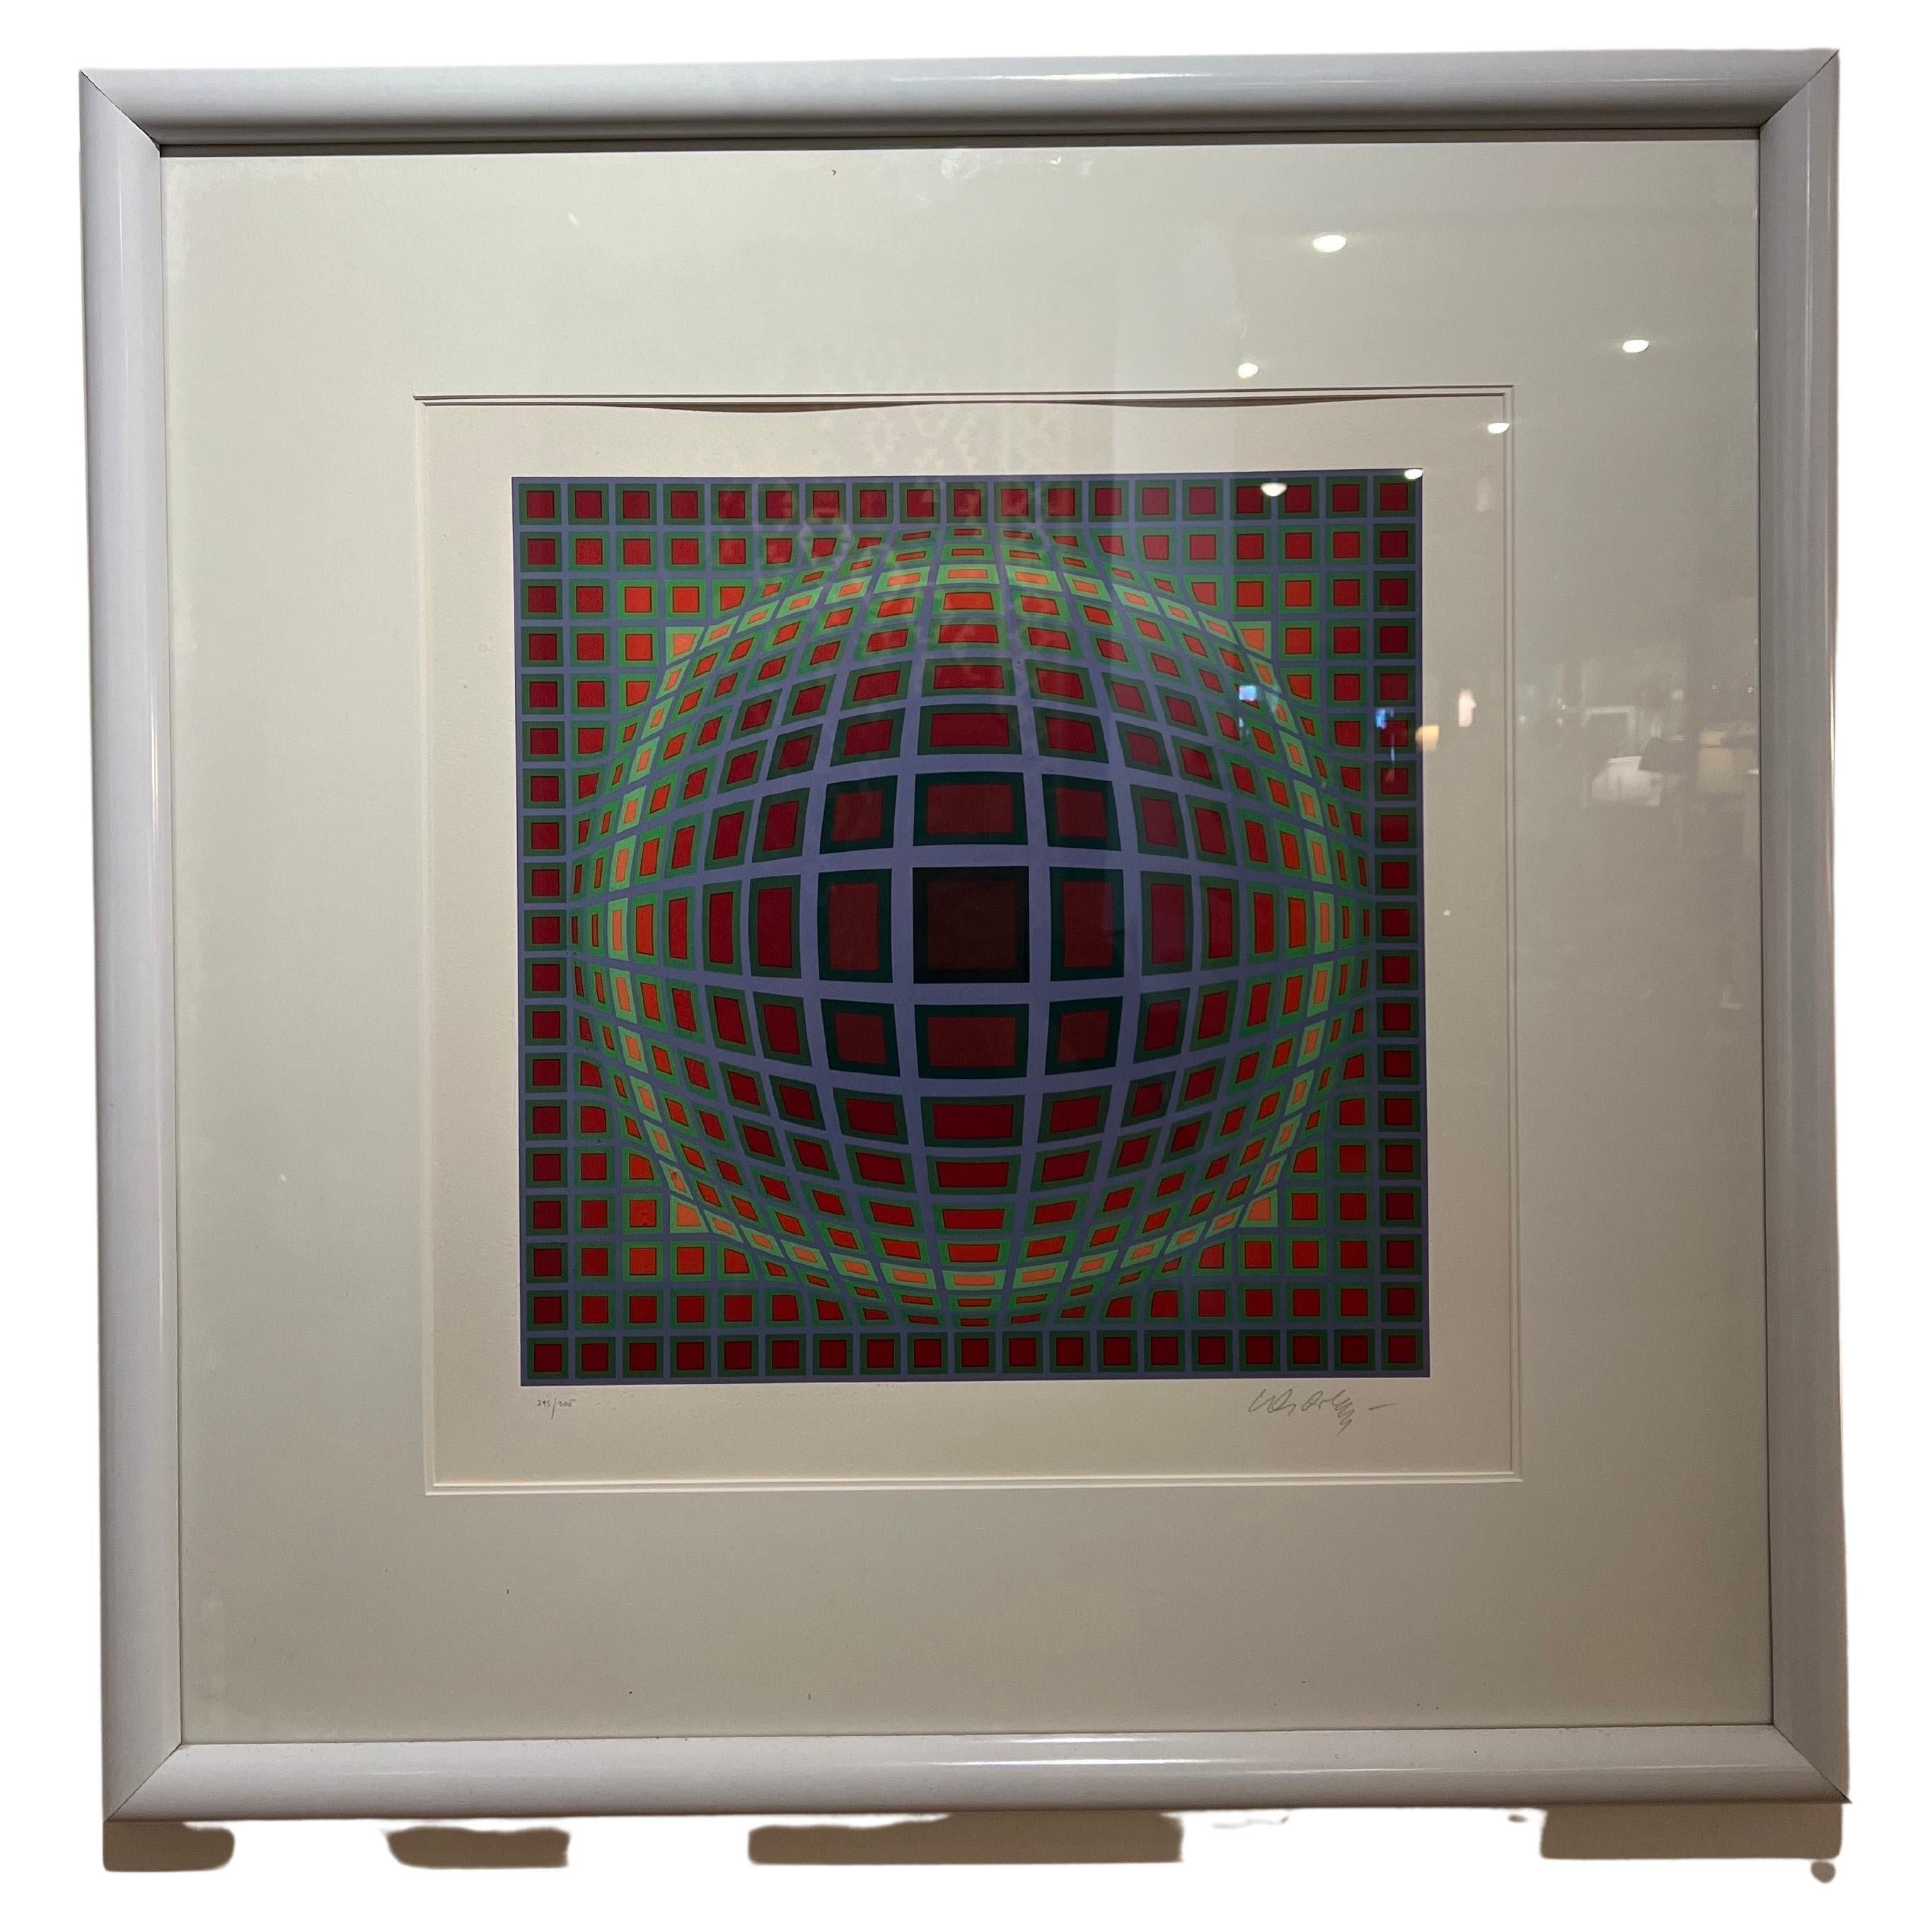 Great example of Vasarely's Vega series optical illusion print technique. Signed and numbered on the front 295/300. Nice original white mate frame with glass.